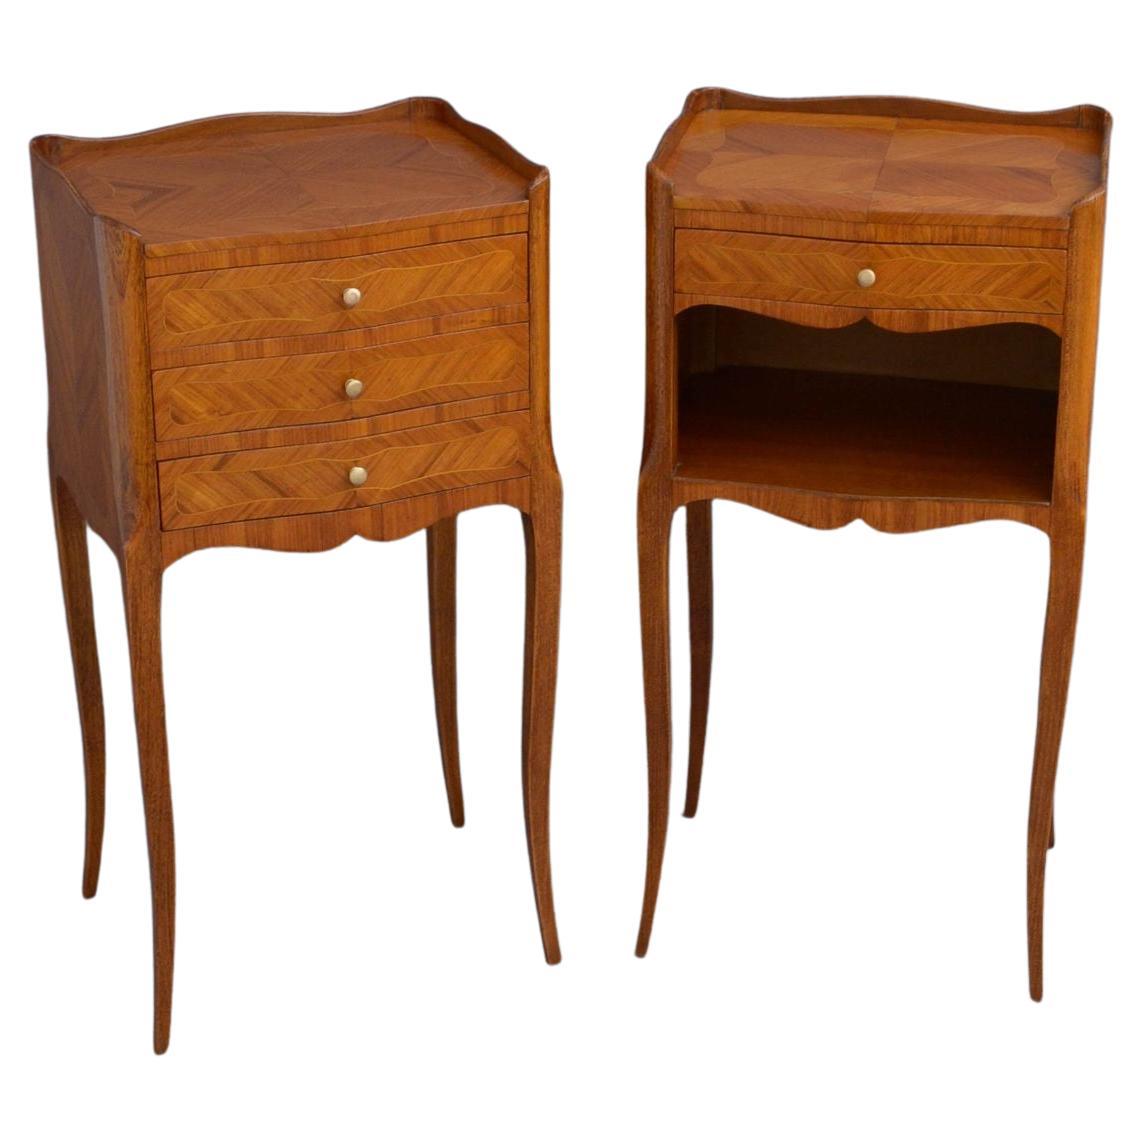 Pair of Tulipwood Bedside Cabinets